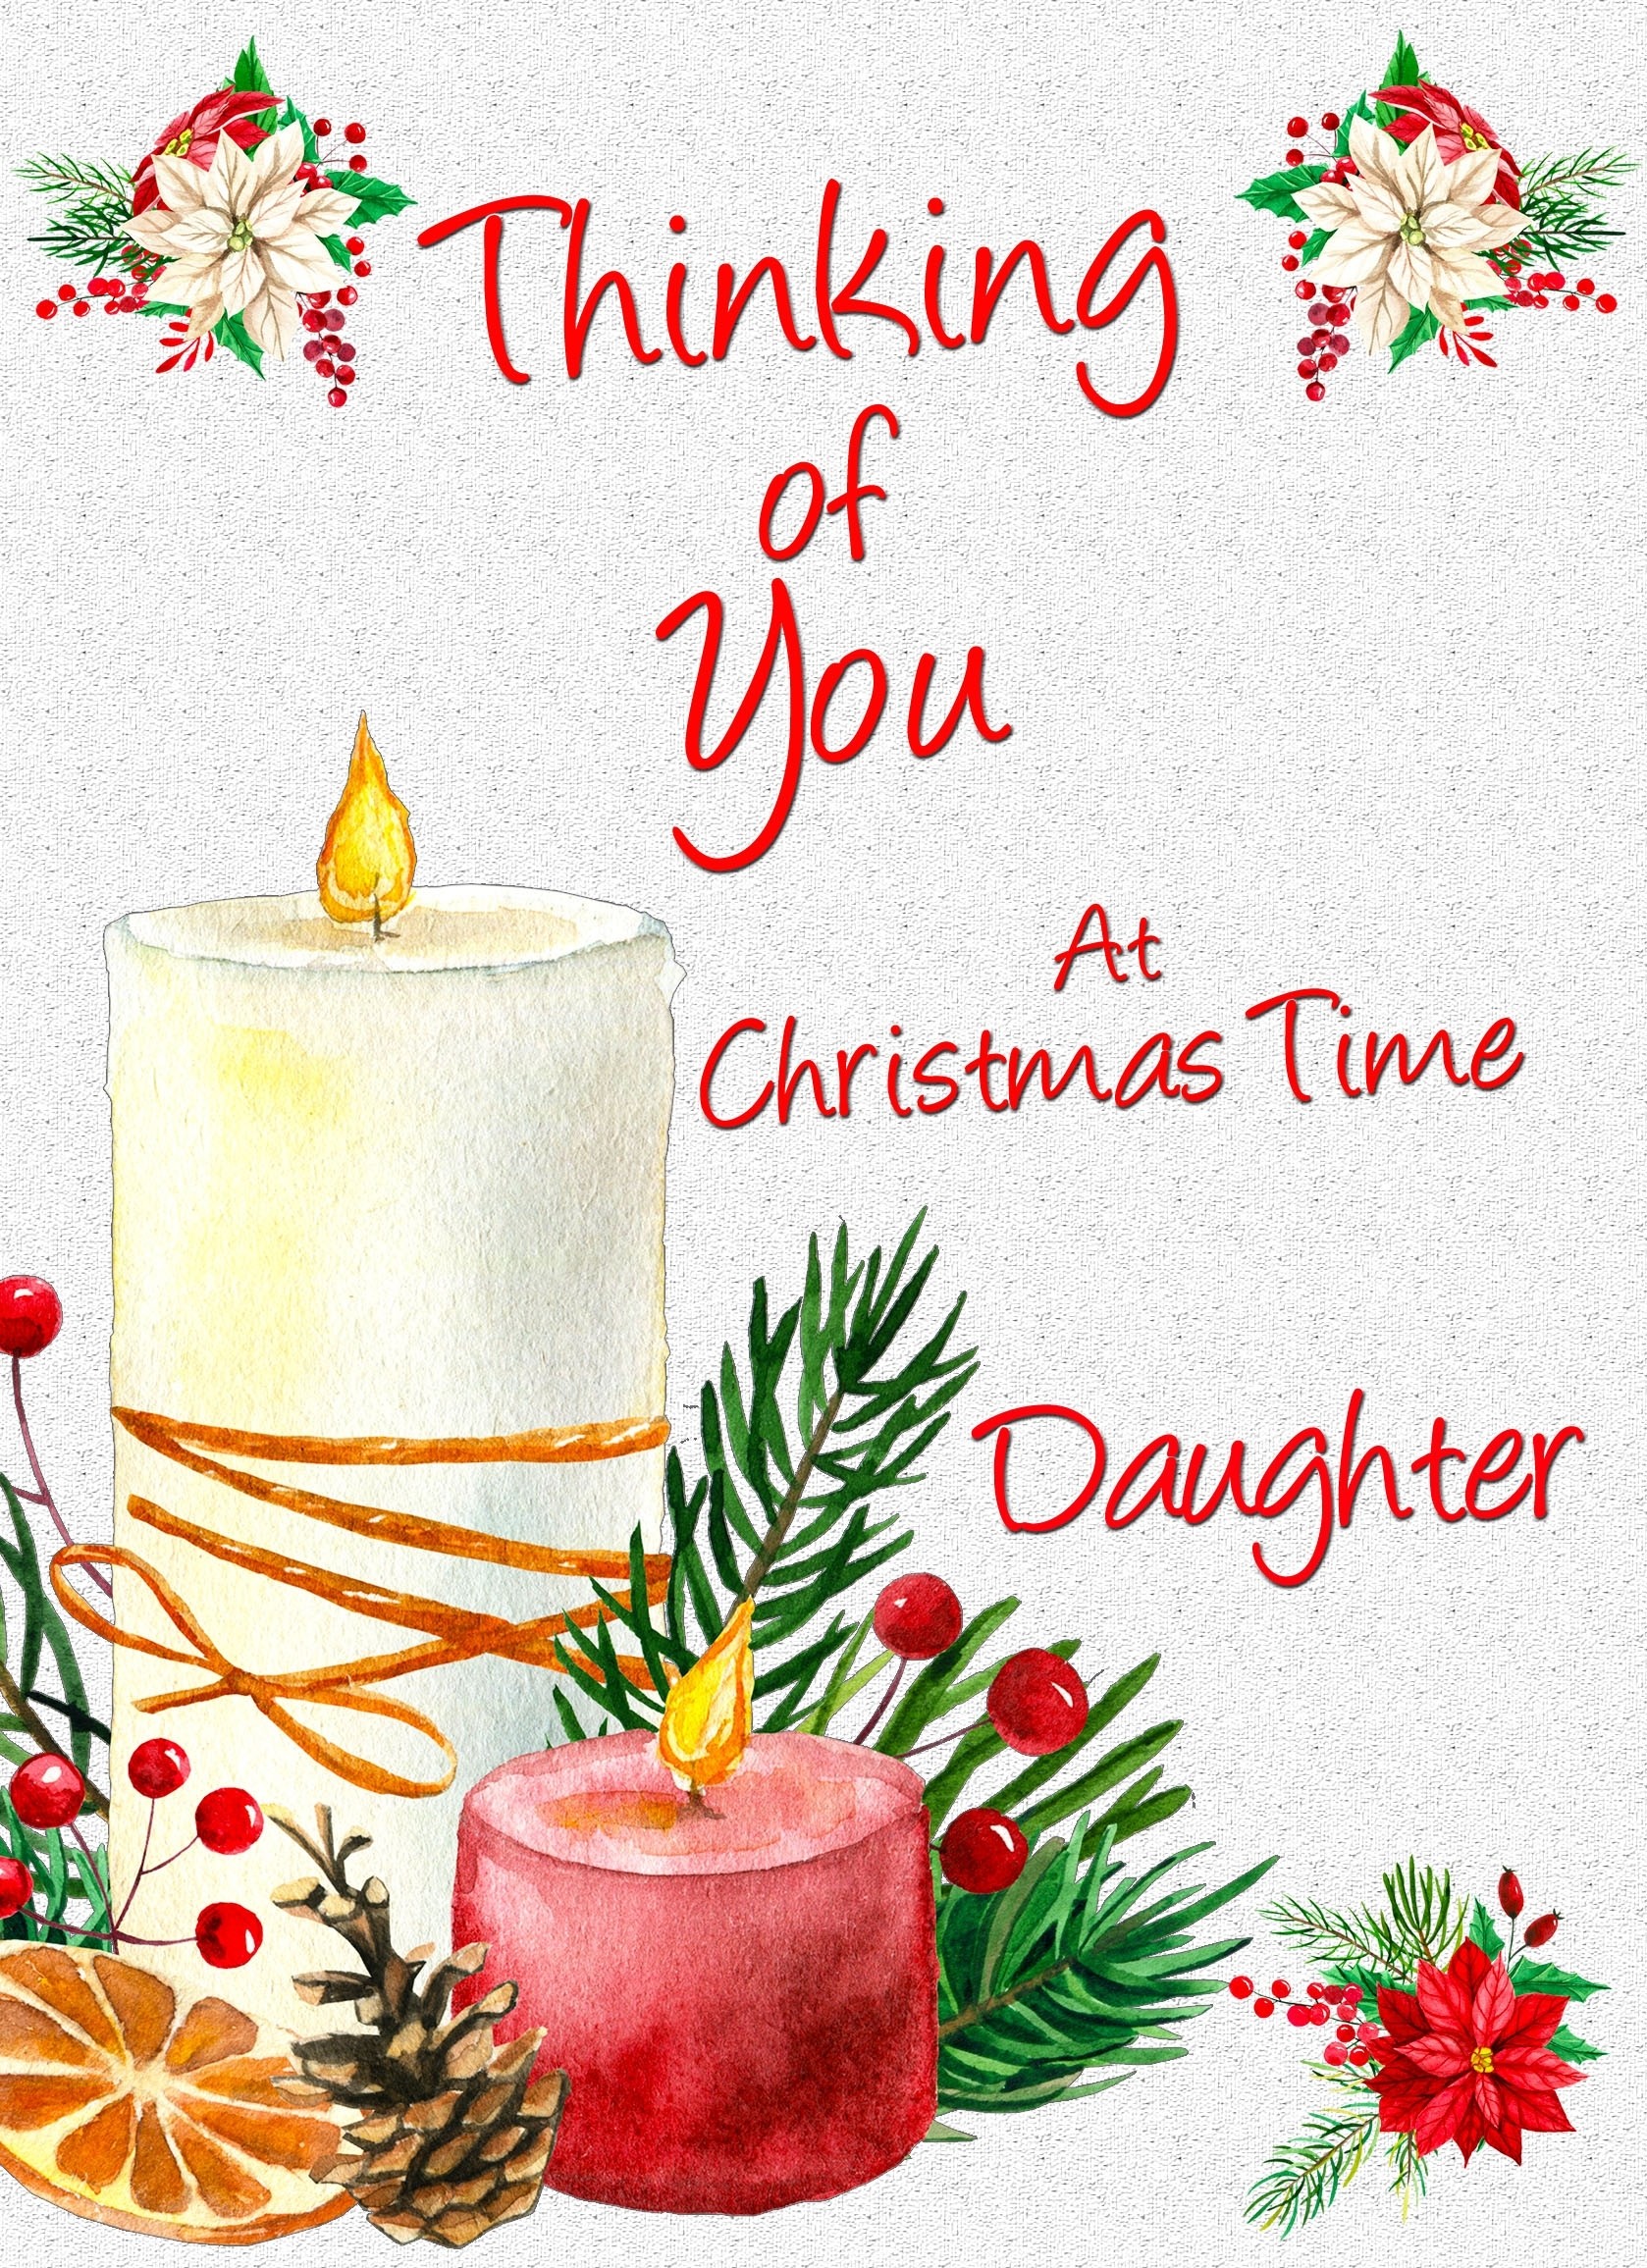 Thinking of You at Christmas Card For Daughter (Candle)